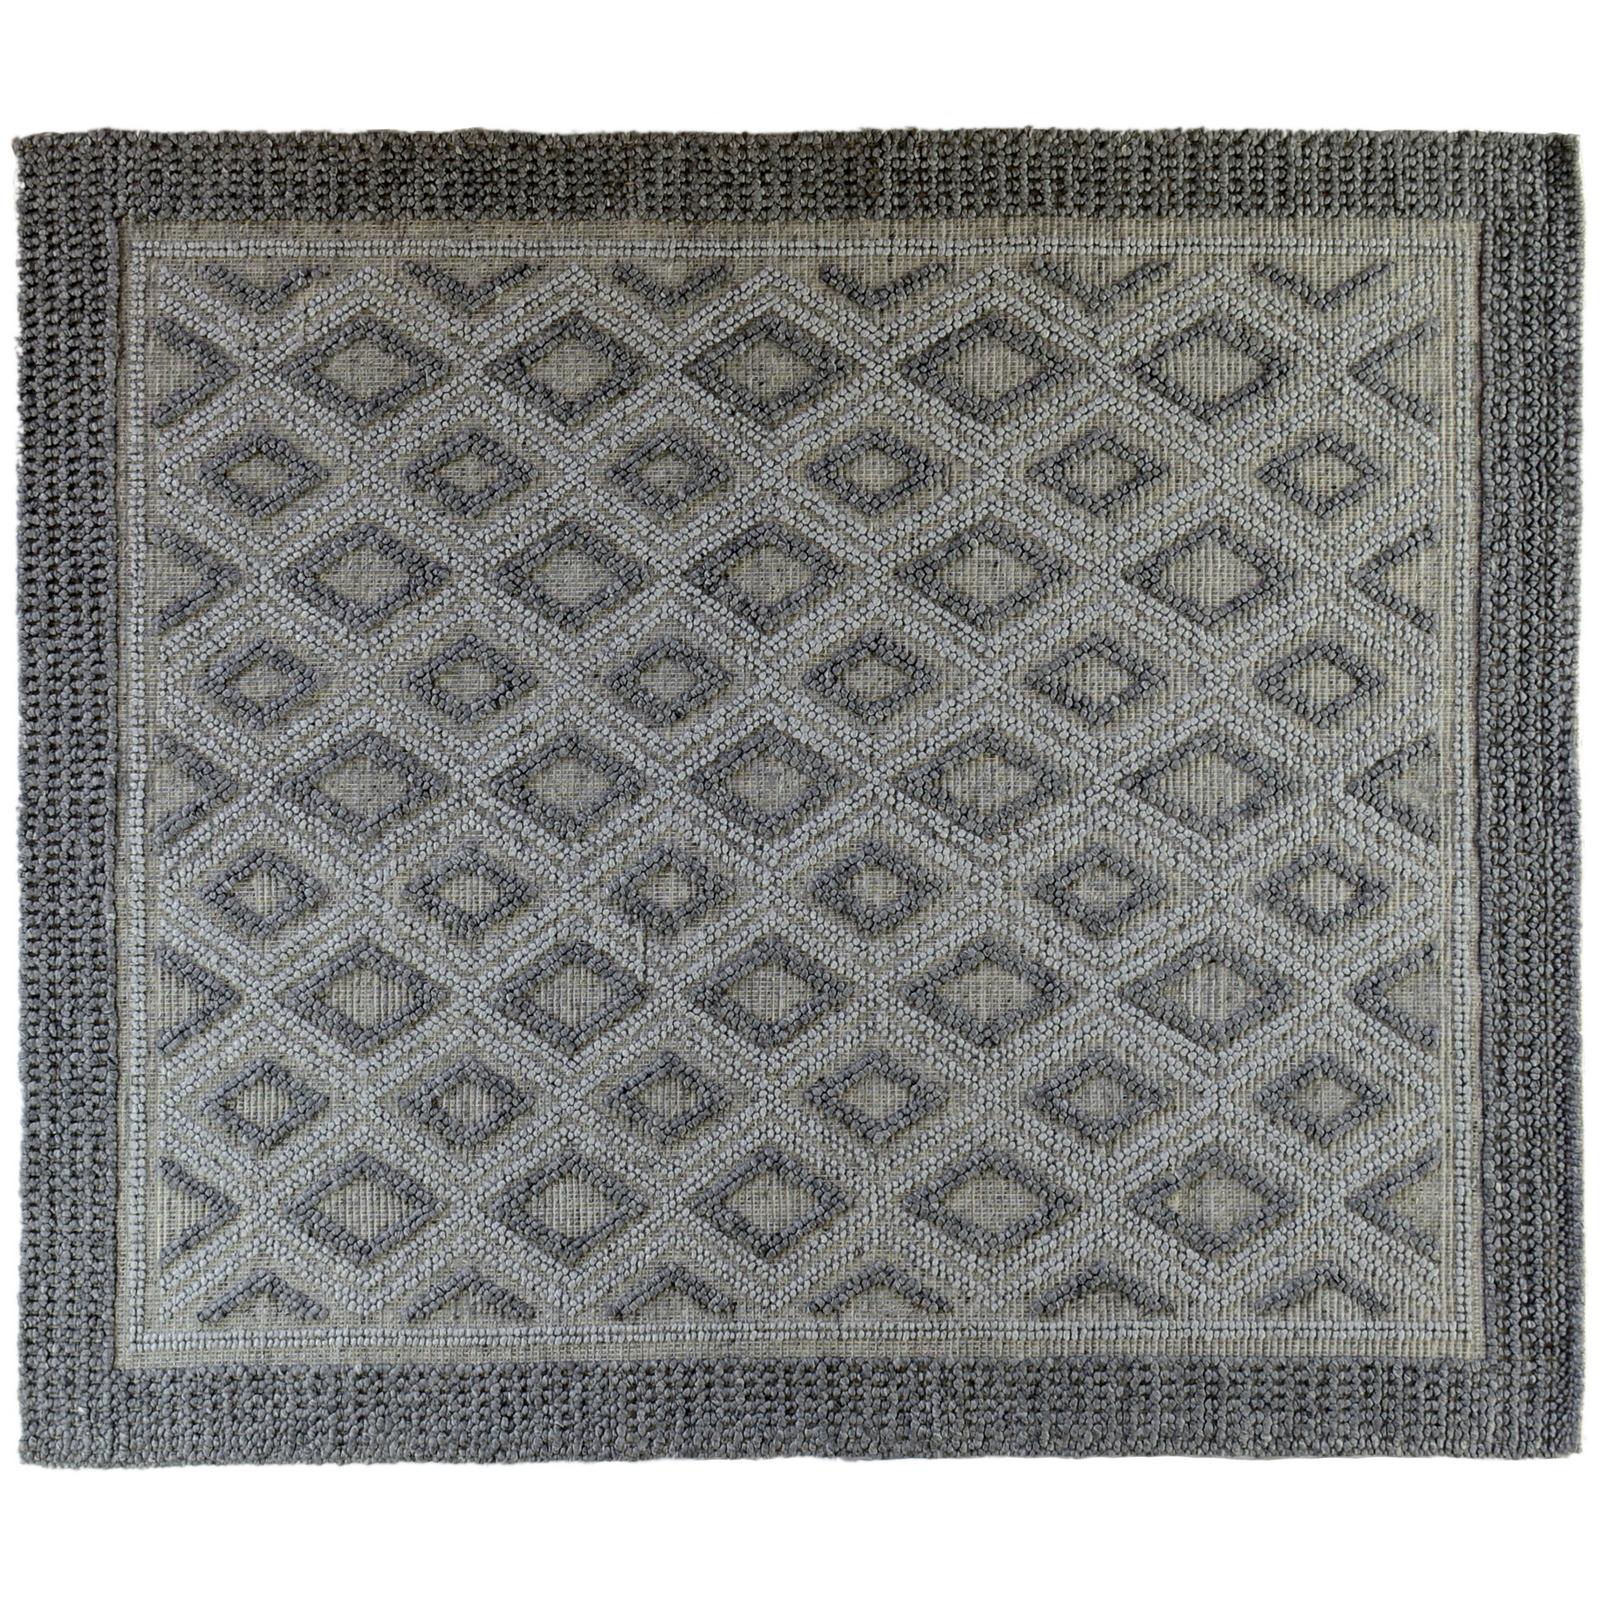 Indian Braided Rug in Black, Gray and Silver For Sale